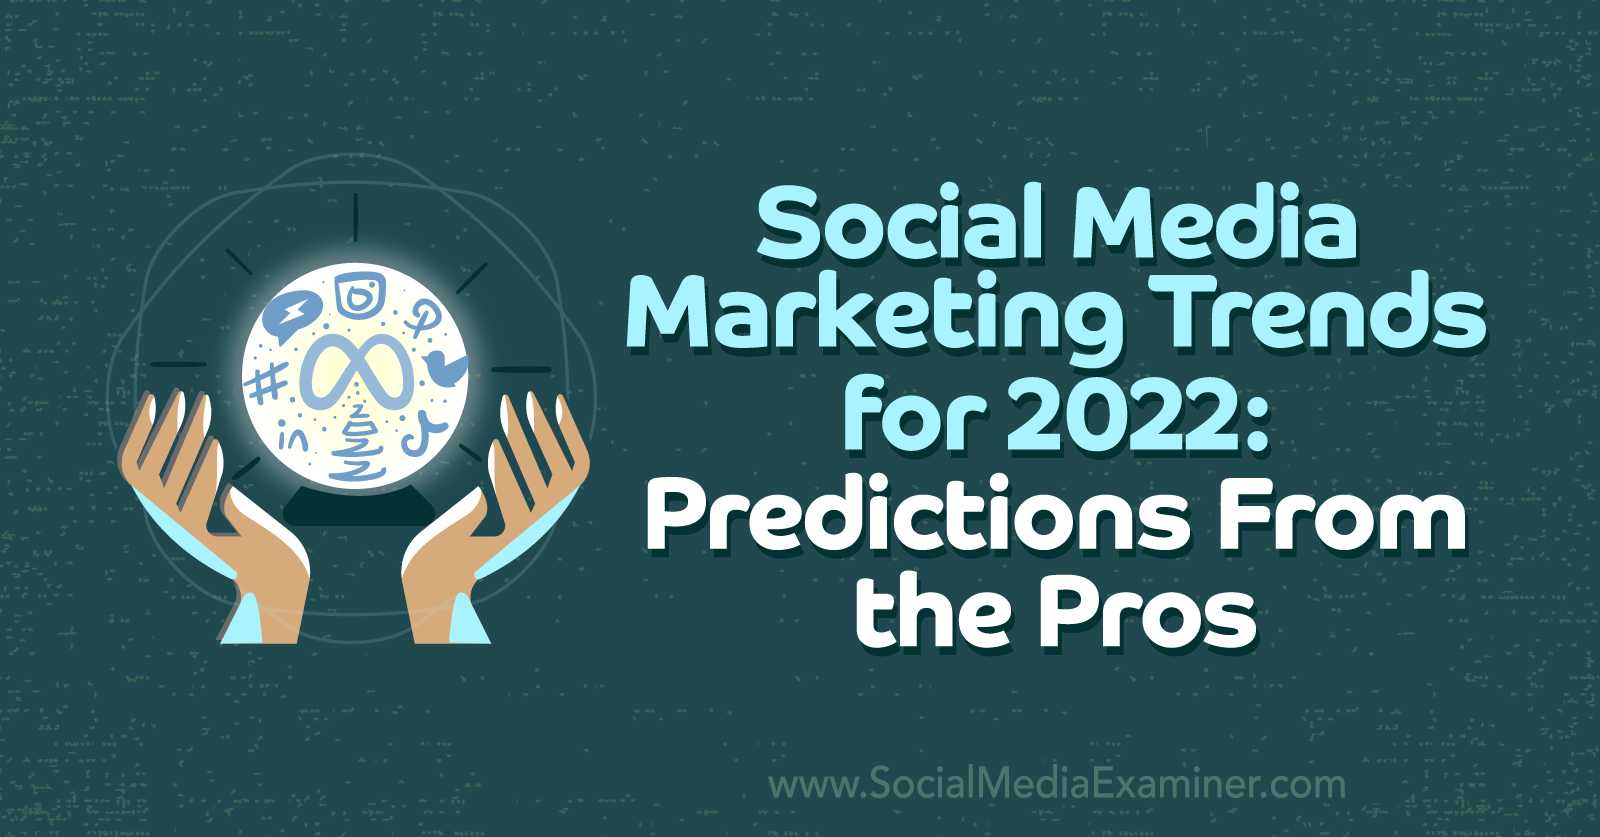 Social Media Marketing Trends for 2022: Predictions From the Pros by Lisa D. Jenkins